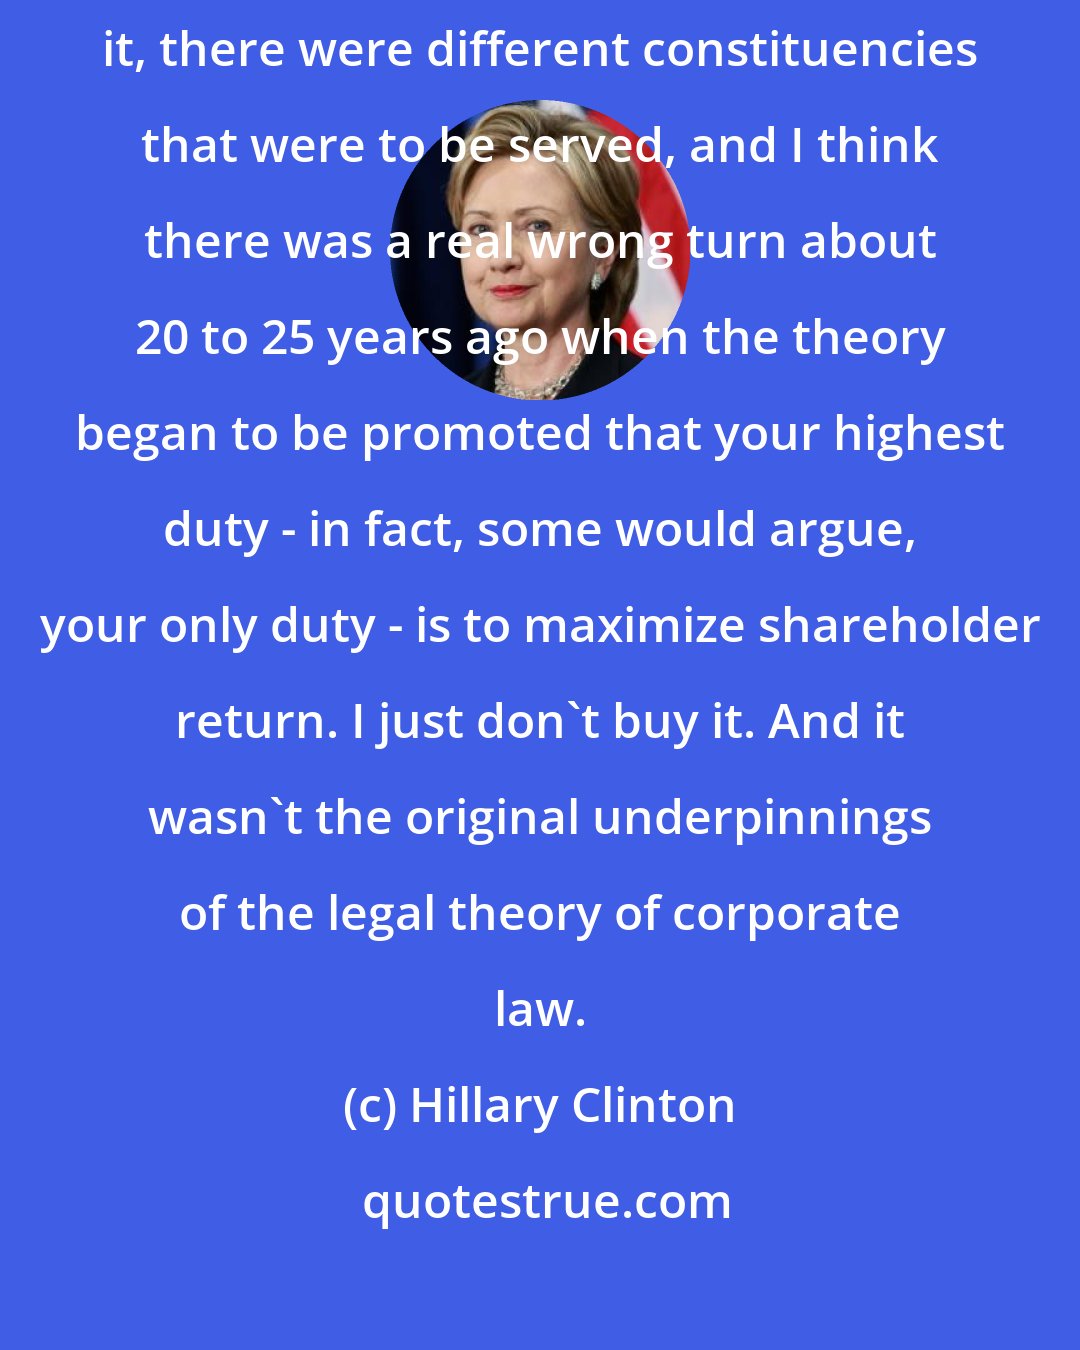 Hillary Clinton: I think we've got to look at corporate law. Back in the day when I studied it, there were different constituencies that were to be served, and I think there was a real wrong turn about 20 to 25 years ago when the theory began to be promoted that your highest duty - in fact, some would argue, your only duty - is to maximize shareholder return. I just don't buy it. And it wasn't the original underpinnings of the legal theory of corporate law.